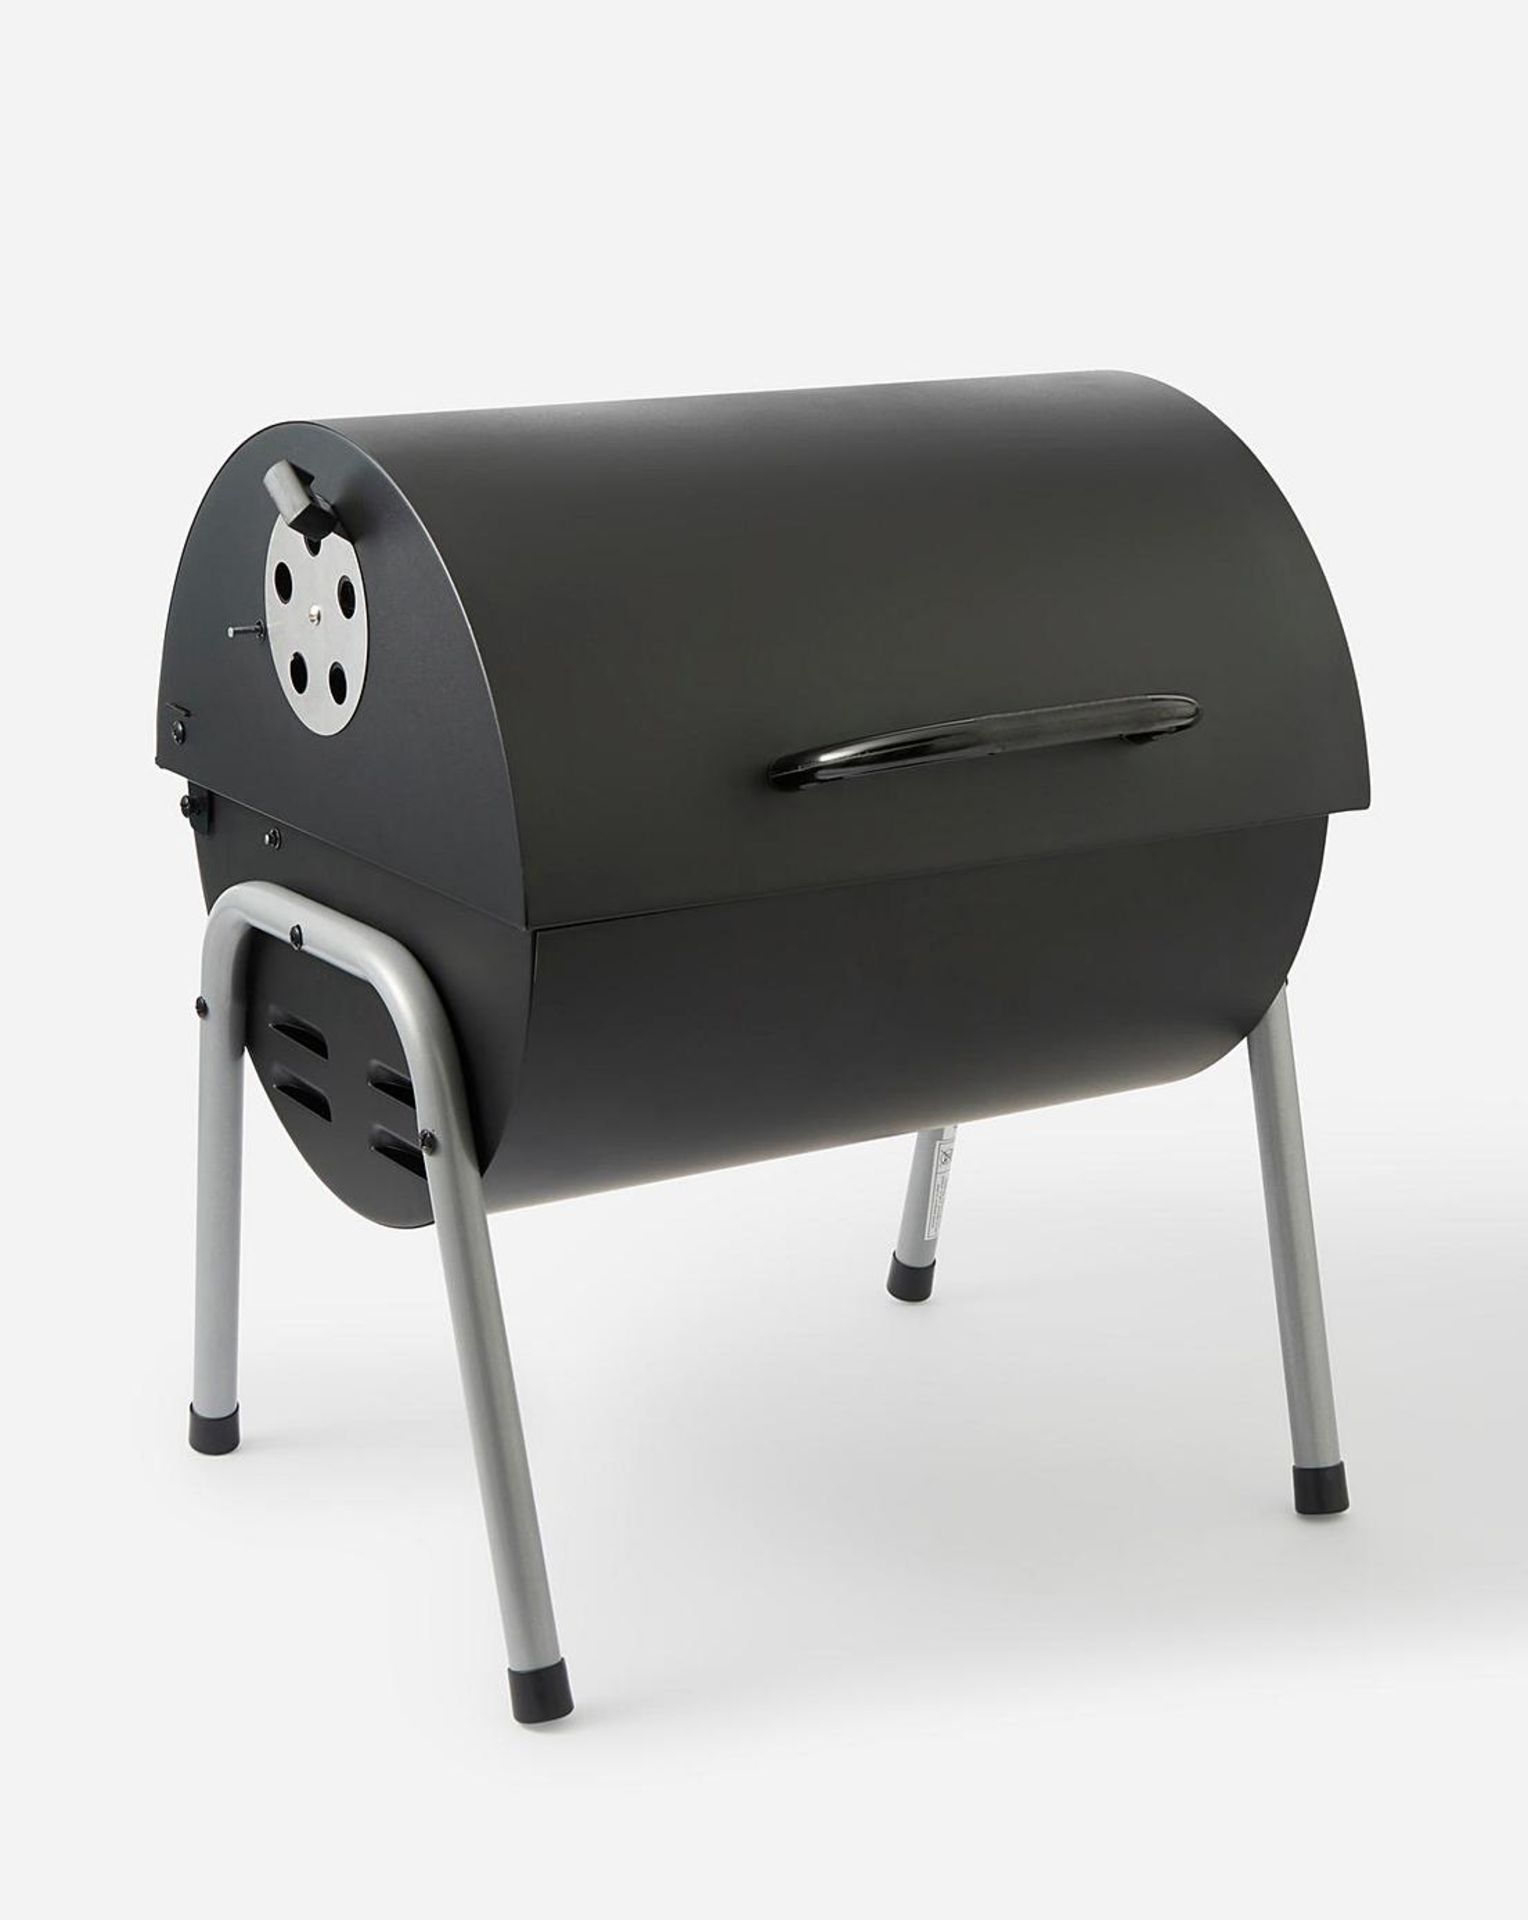 4x BRAND NEW Tabletop Oil Drum Barbeque Grill. RRP £59.99 EACH. Black steel firebowl with enamel - Image 3 of 3